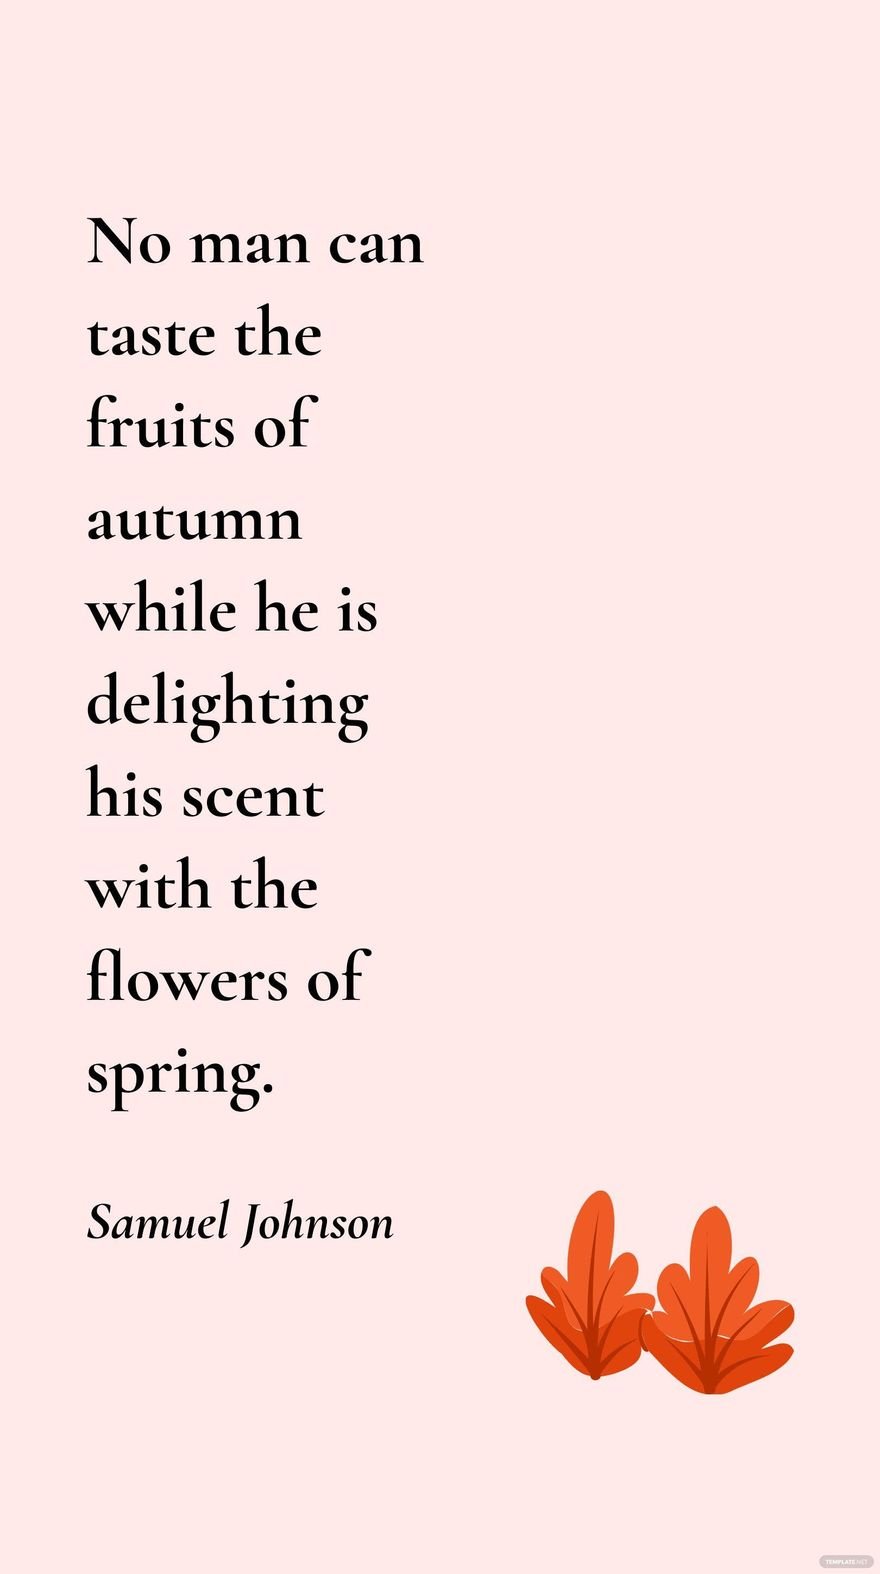 Samuel Johnson - No man can taste the fruits of autumn while he is delighting his scent with the flowers of spring.